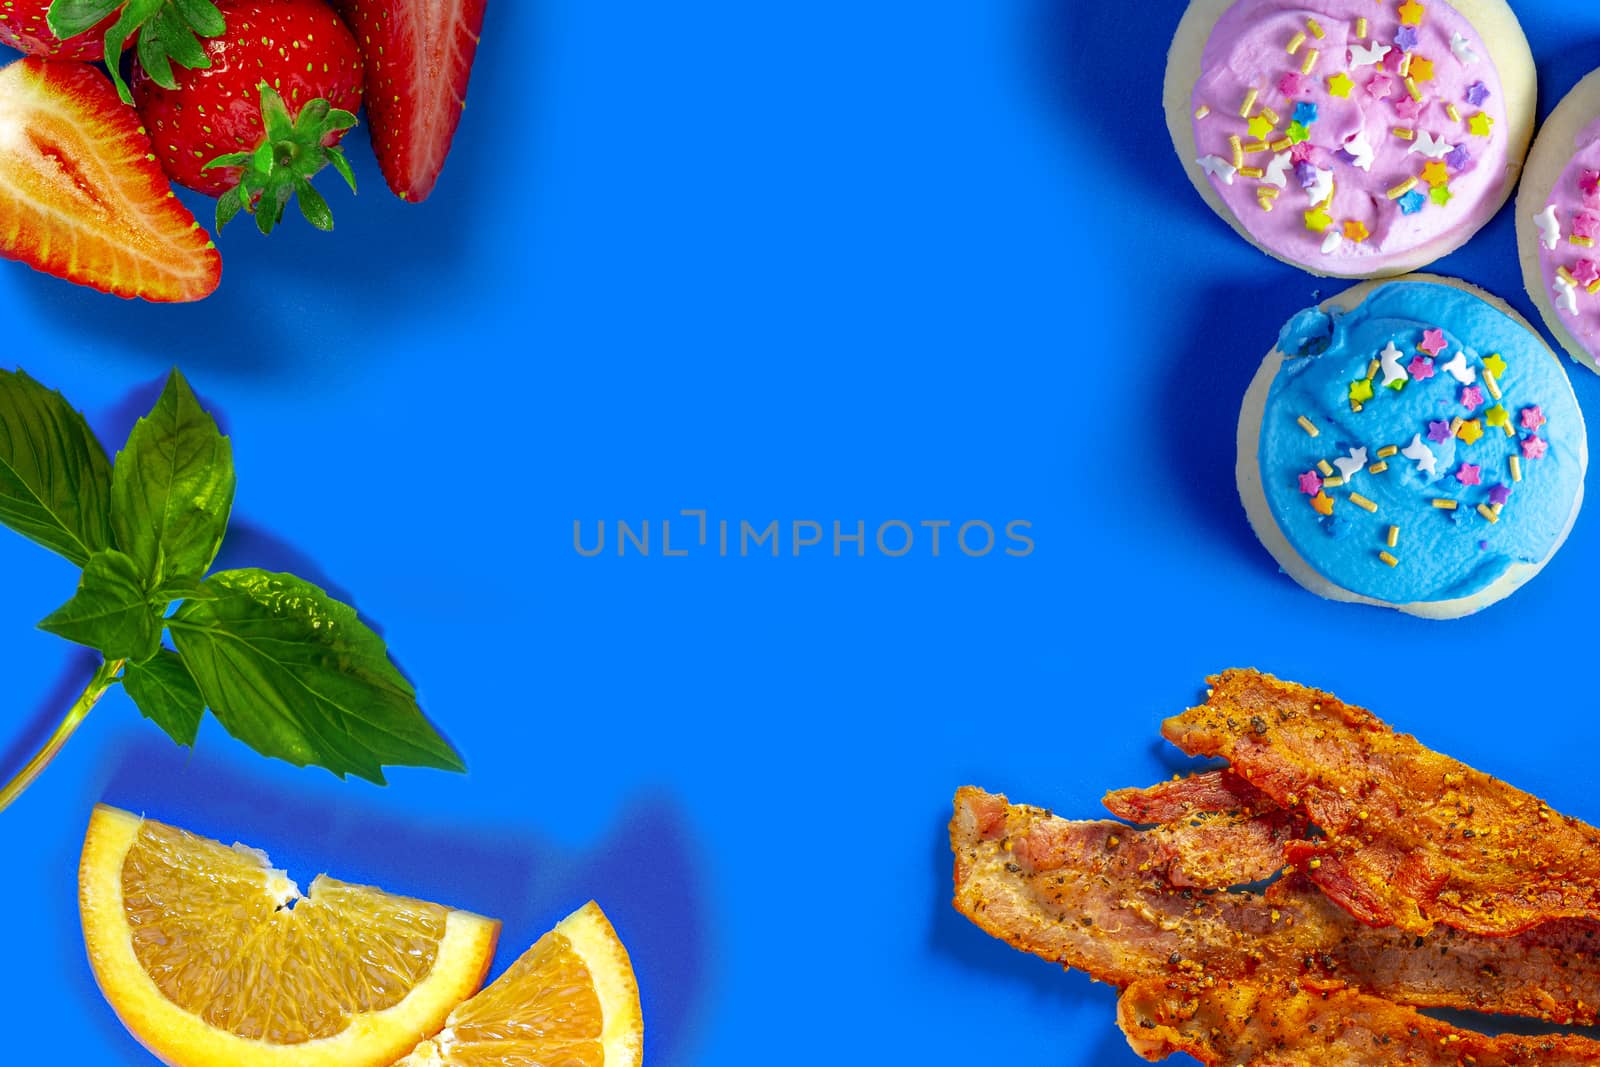 Food collage on a blue background by oasisamuel